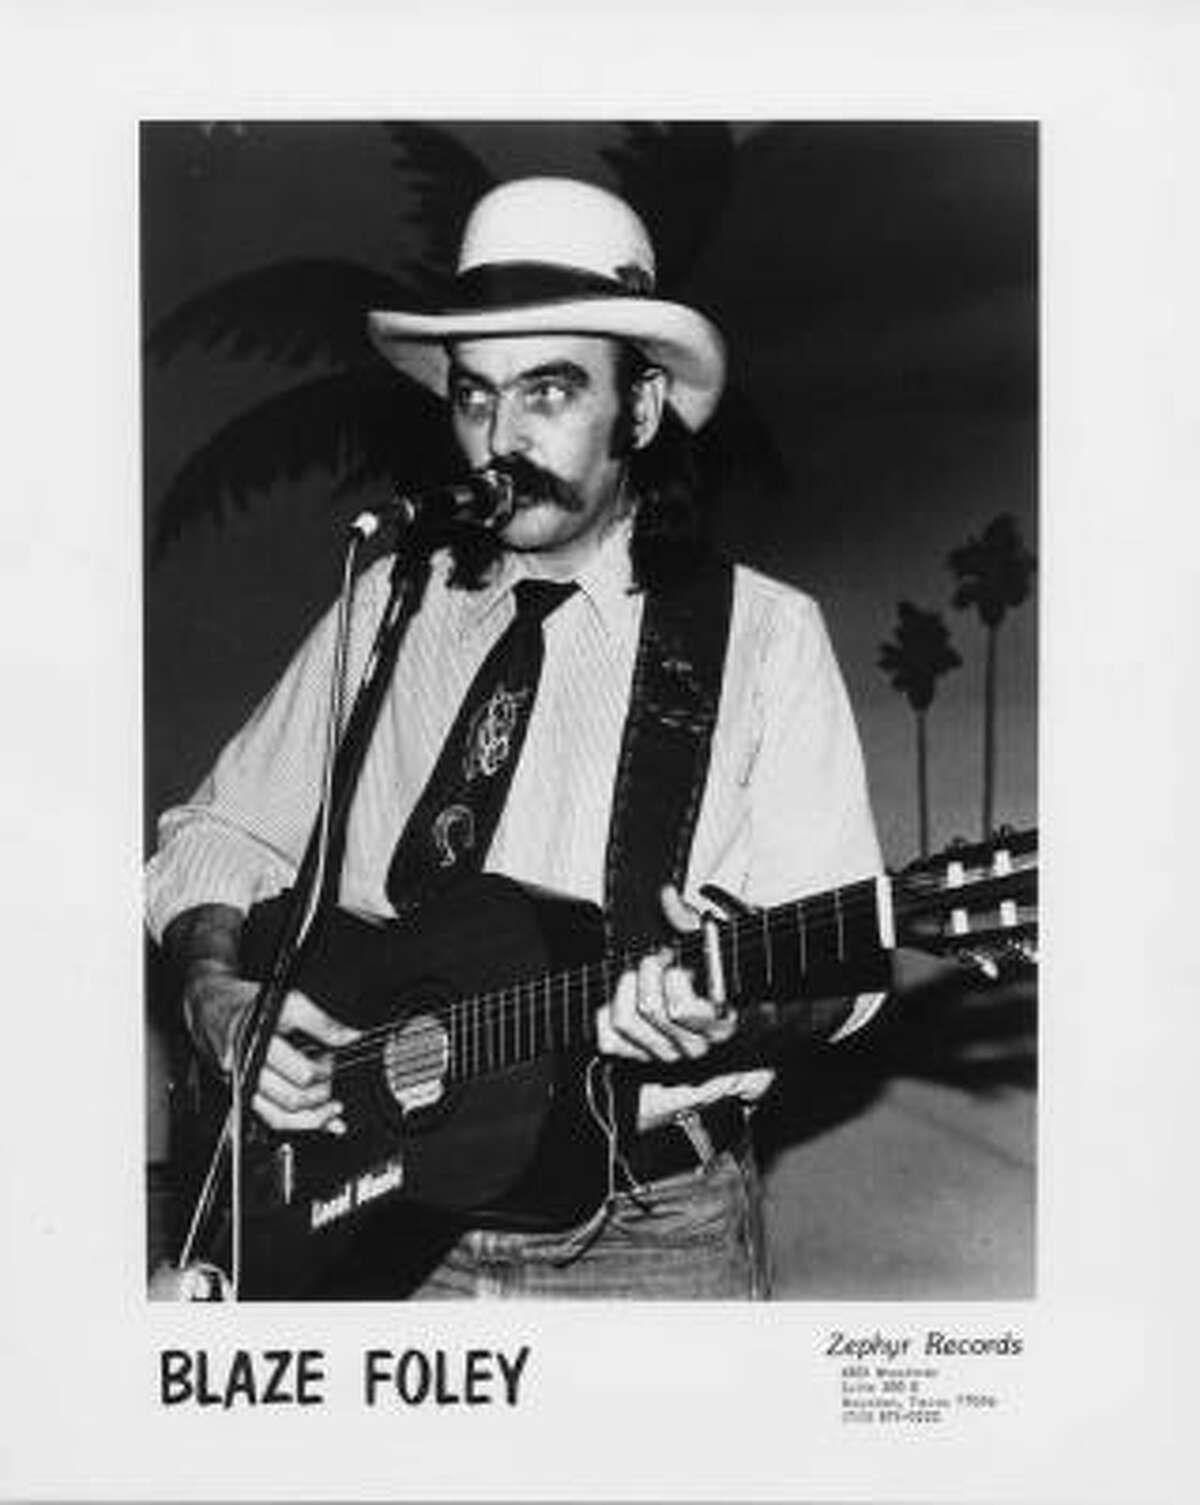 Blaze Foley's music and life are the subject of a new documentary.